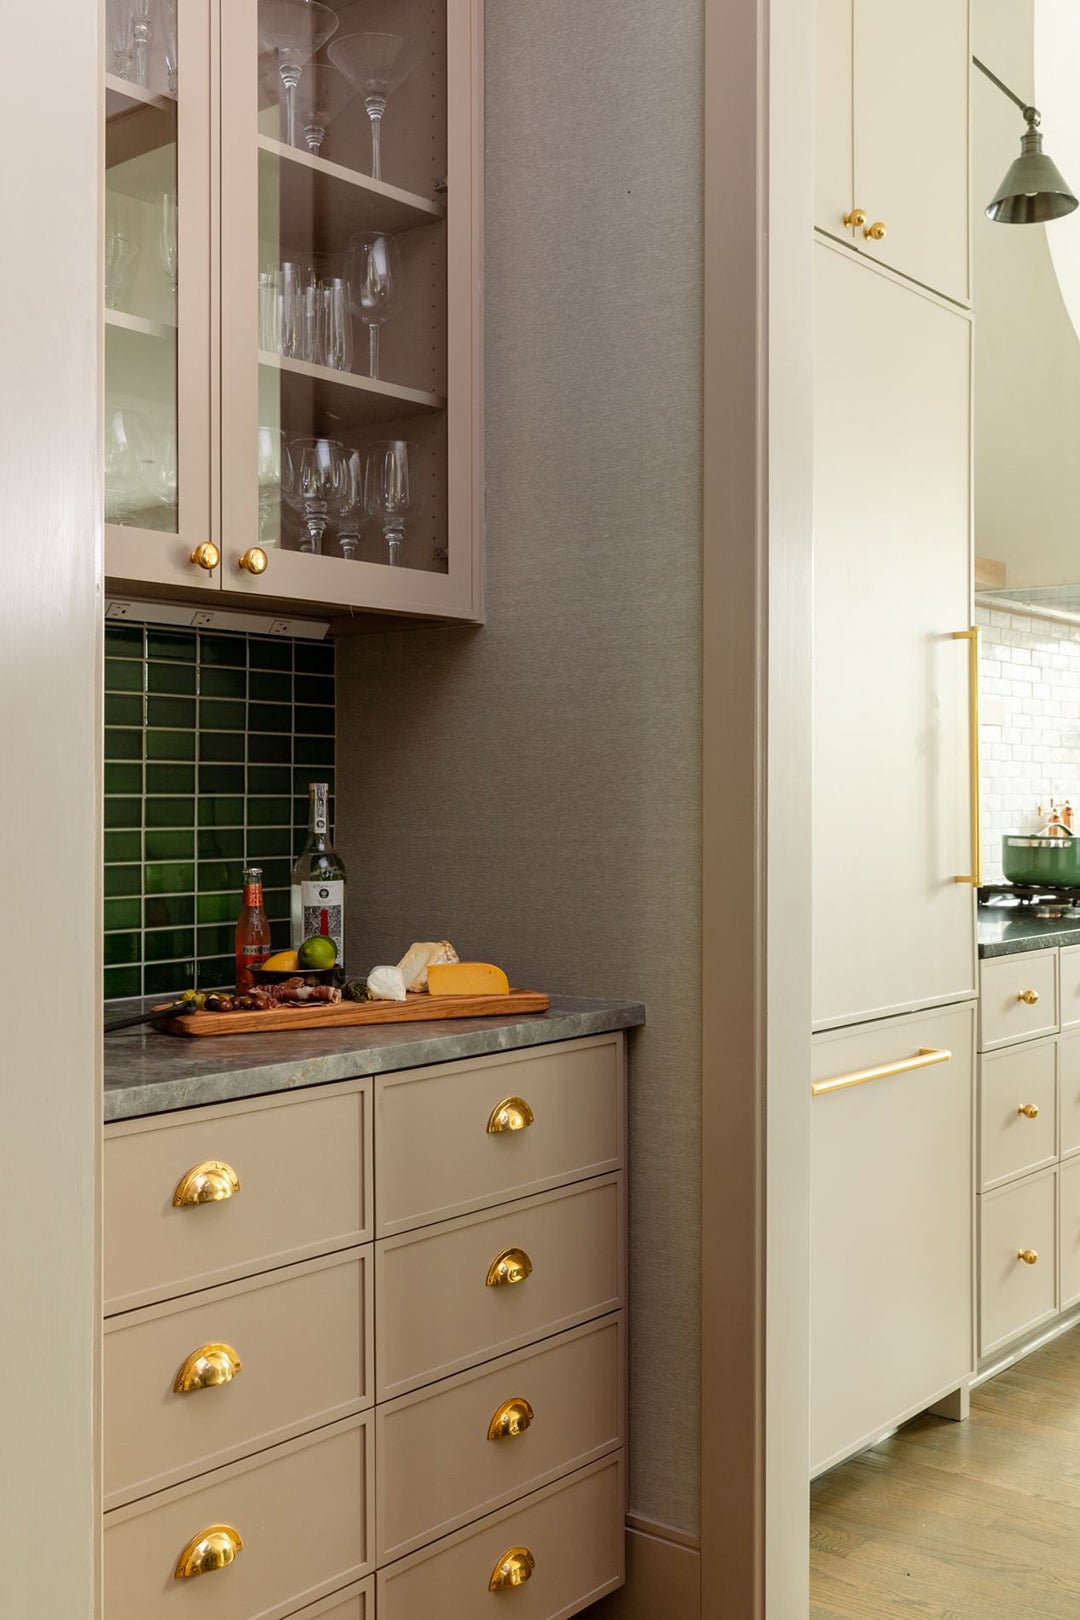 walk-in kitchen nook with green tiles